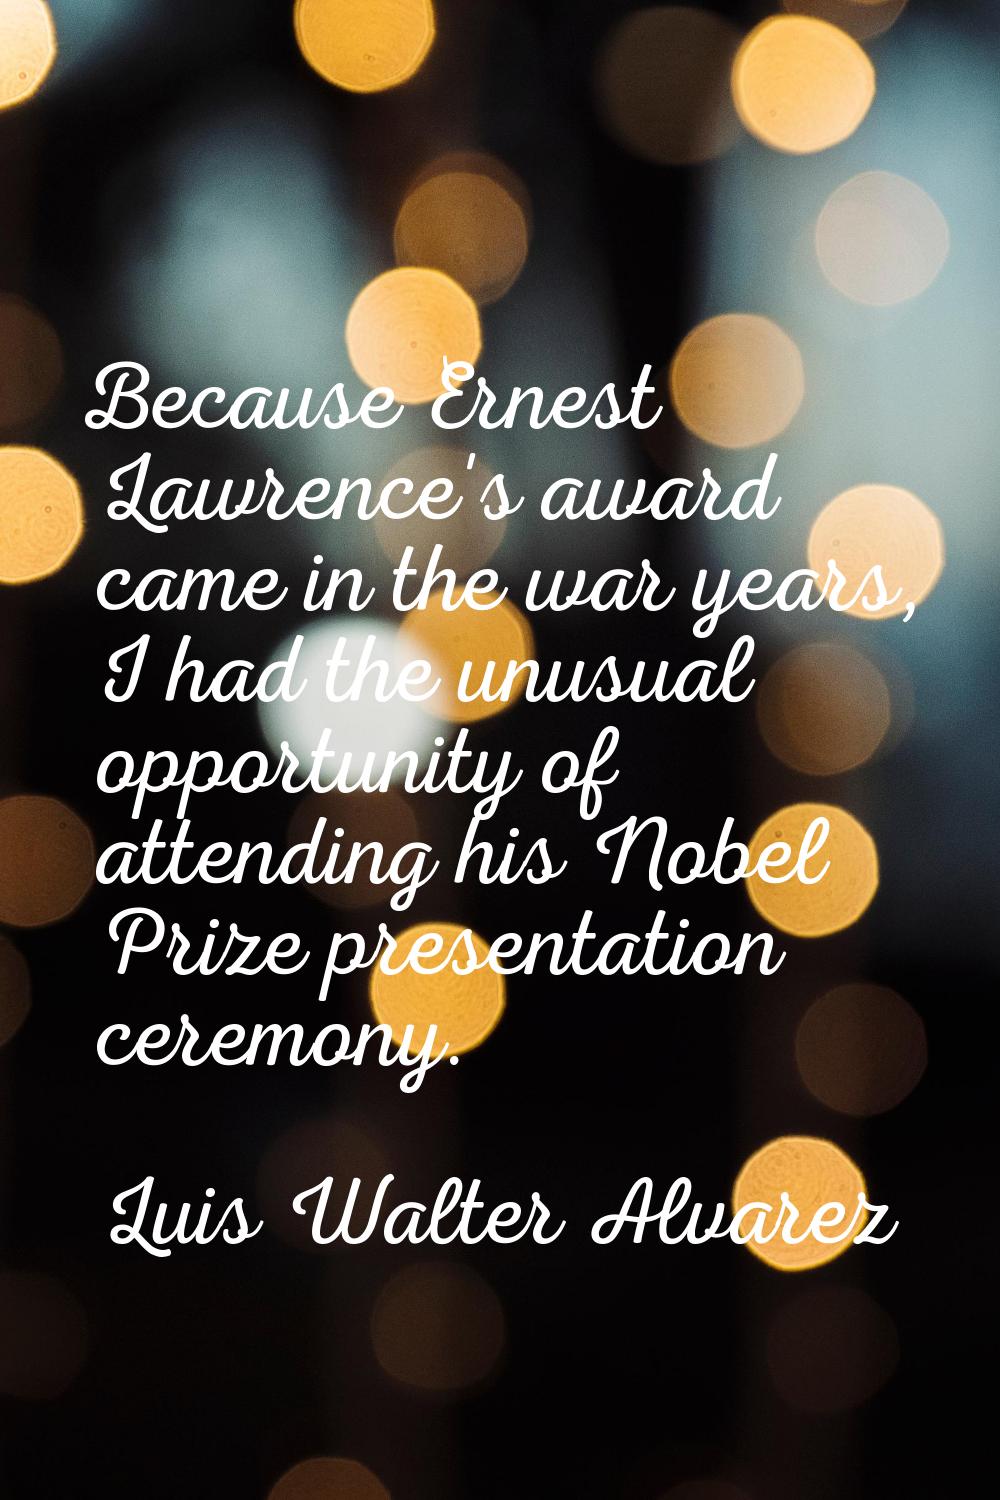 Because Ernest Lawrence's award came in the war years, I had the unusual opportunity of attending h